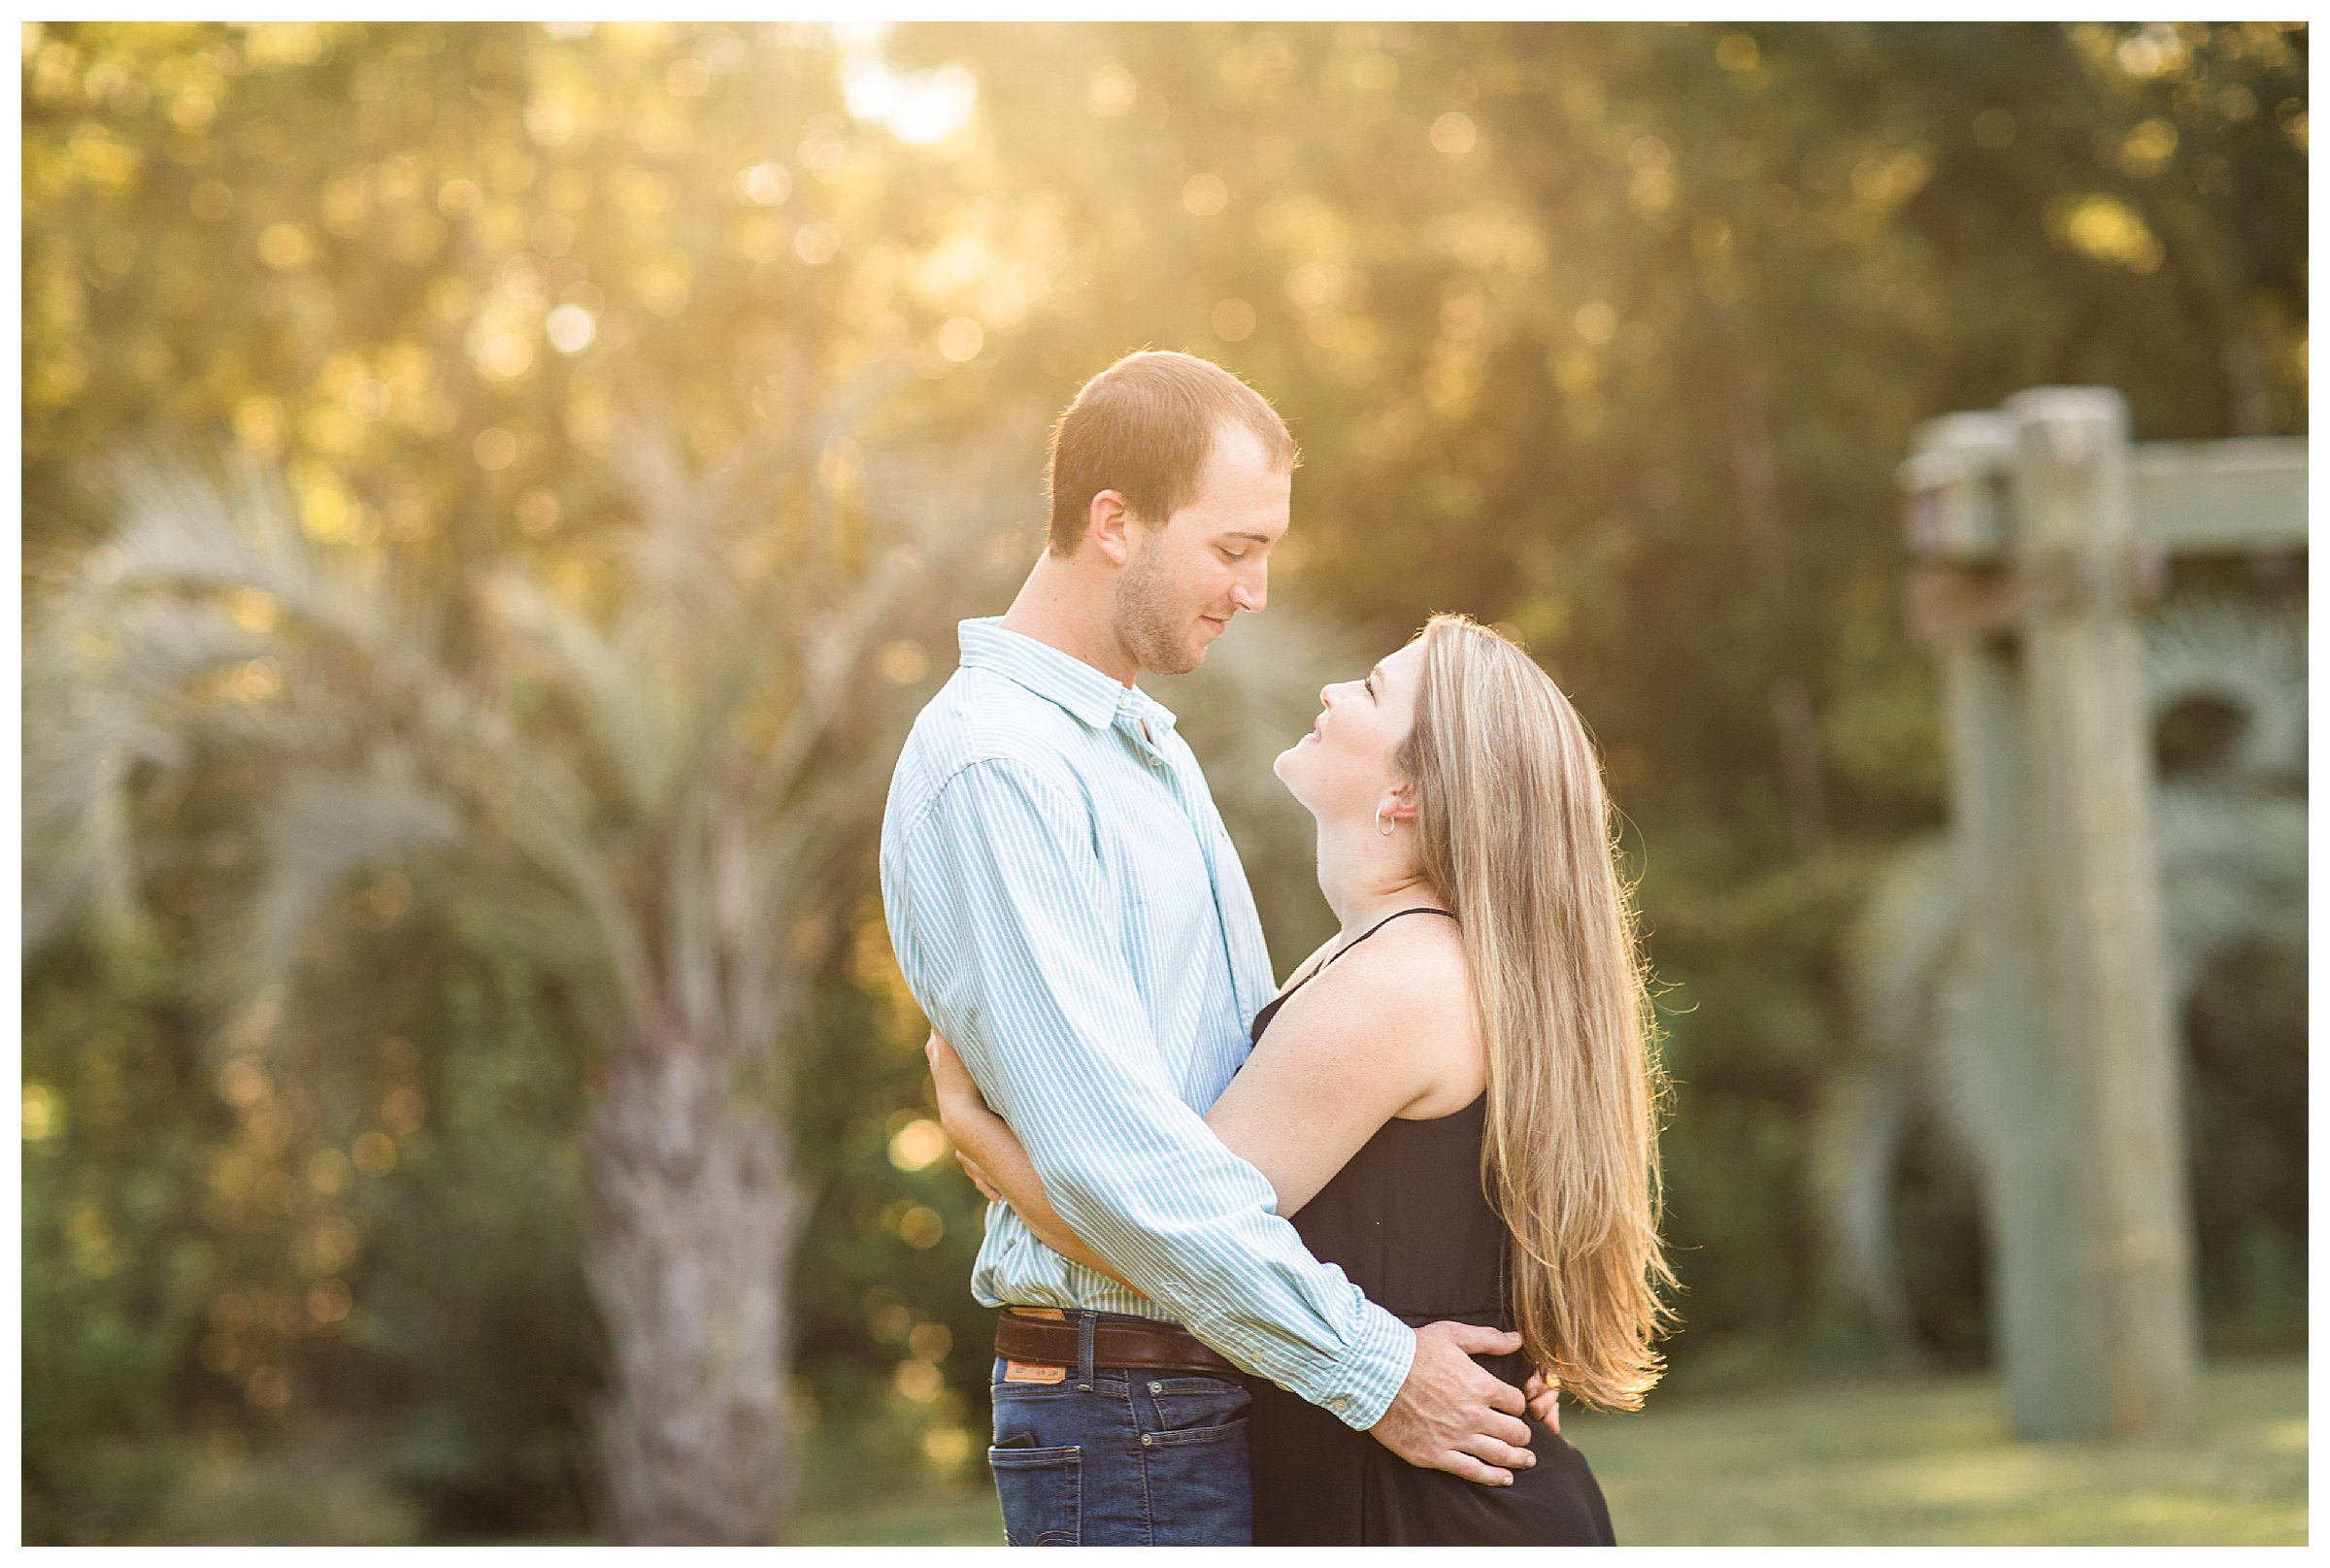 Lewiswood Farm Engagement Session, Tallahassee FL, Kelley Stinson Photography